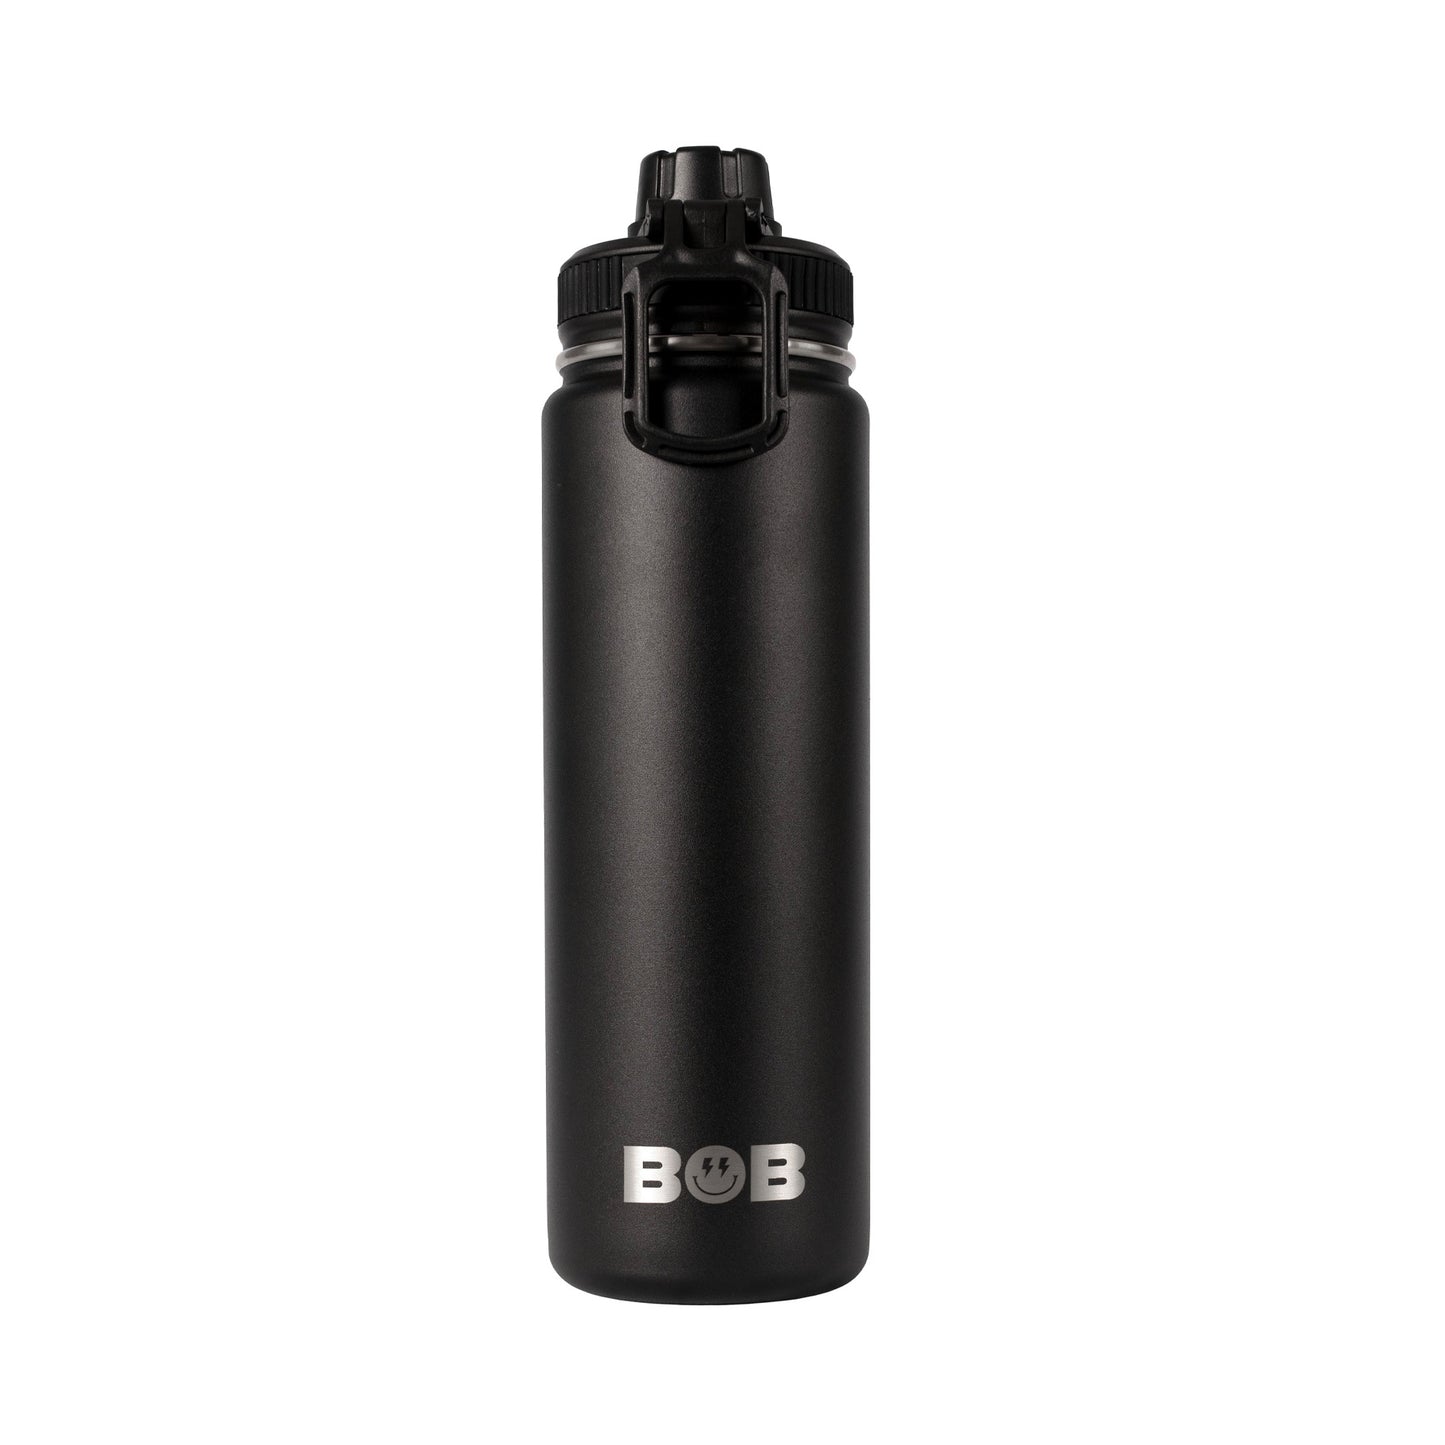 BOBs 26Oz Double Wall Vacuum Insulated Water Bottle with Spout Lid by BOB The Cooler Co